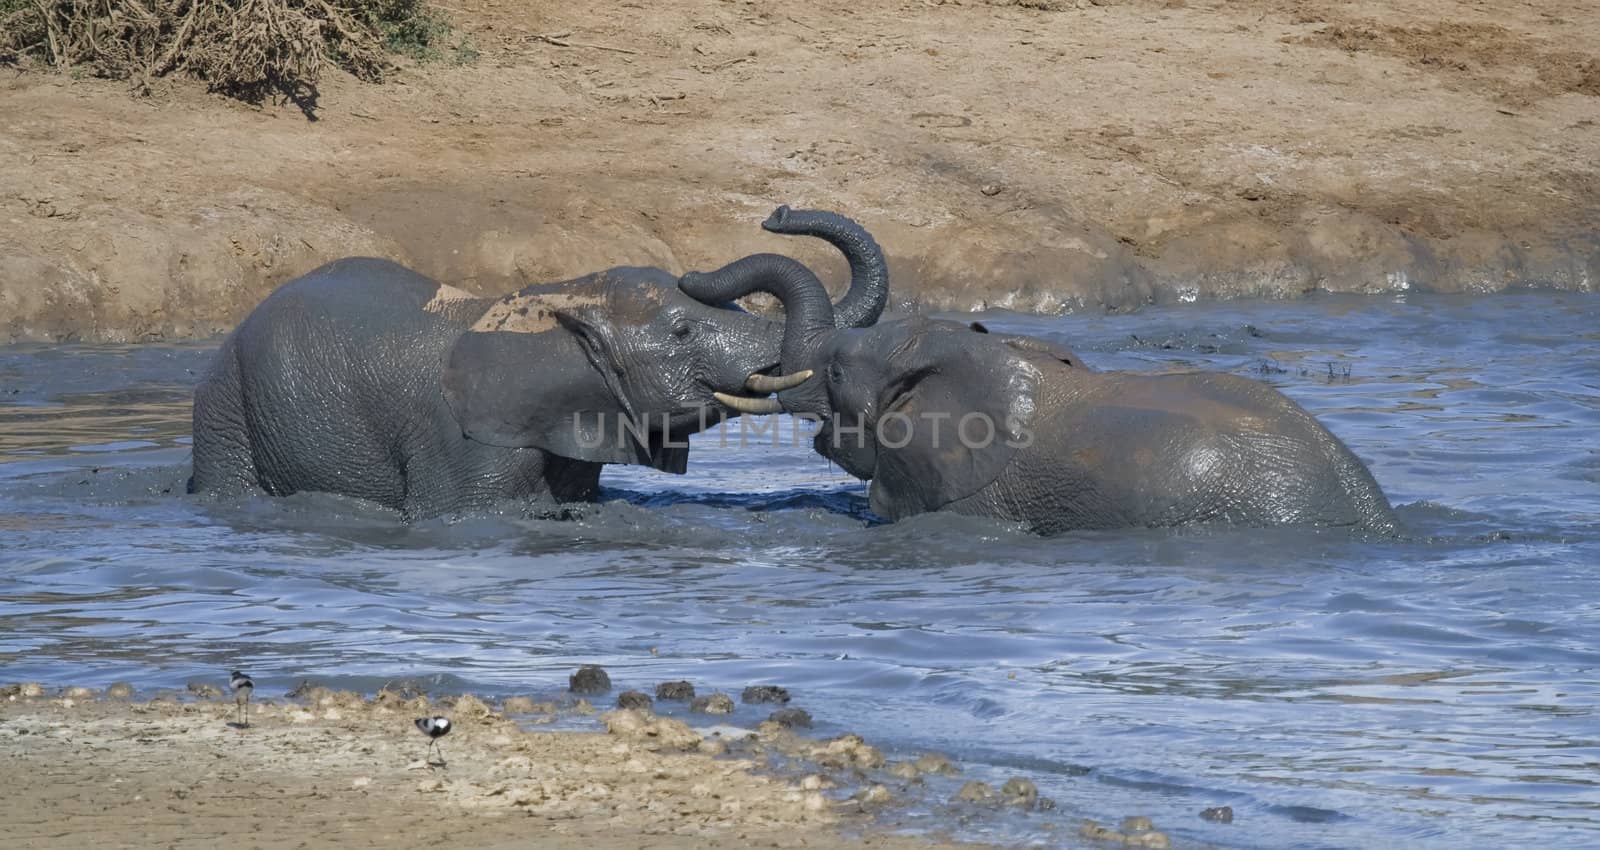 African elephants playing a game of dominance in the water